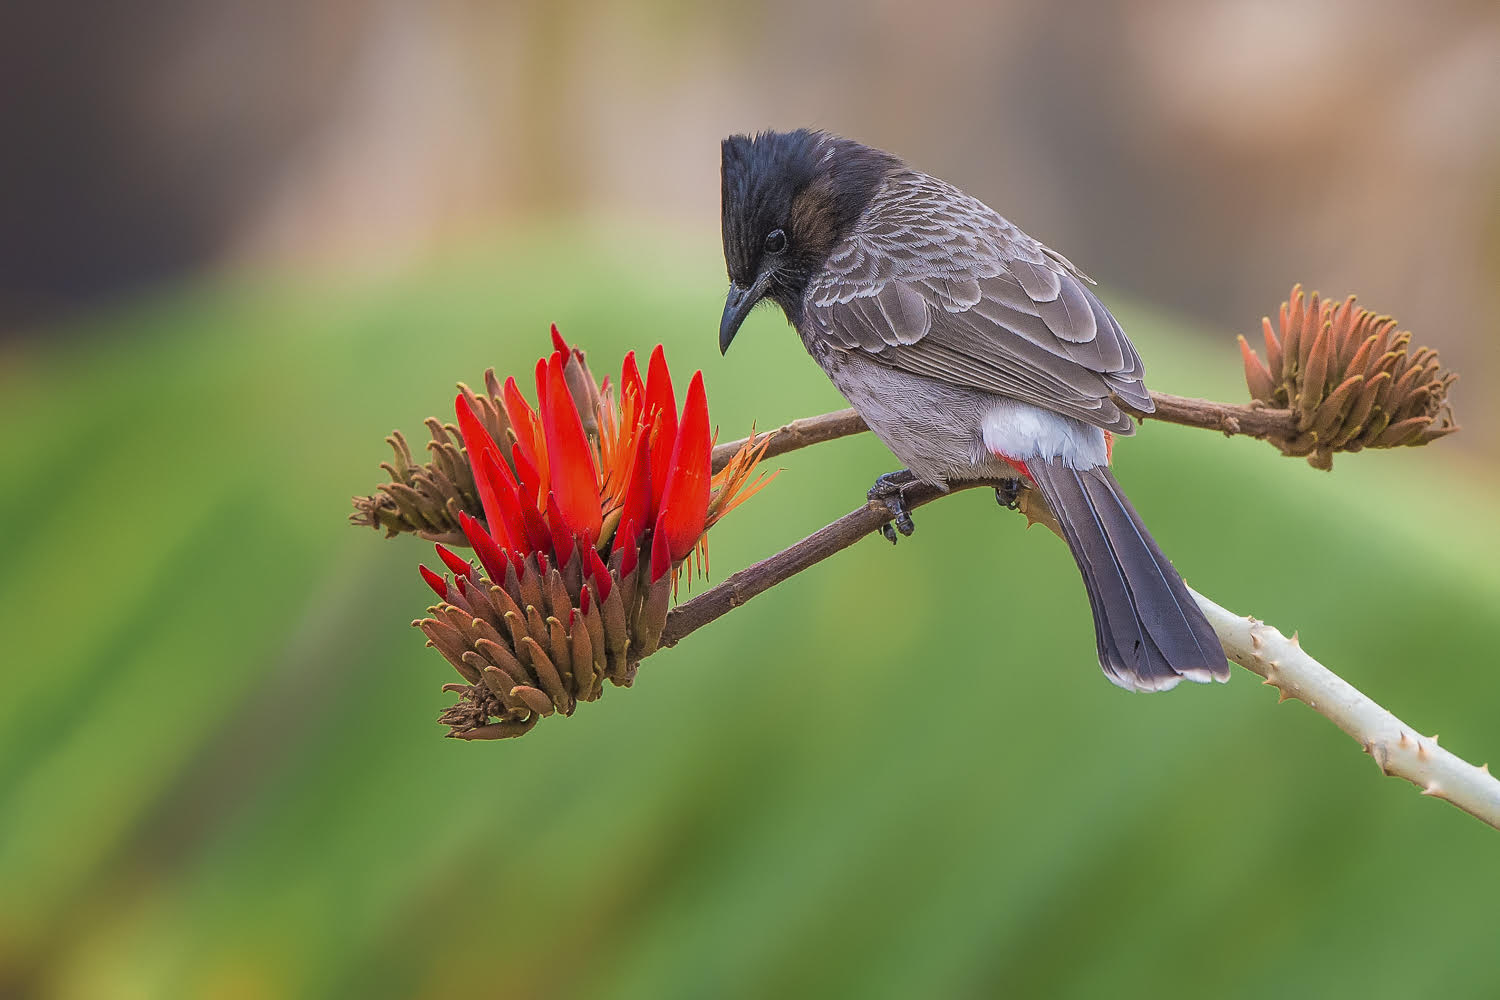 Birdlife: Red-crested Bulbul - Courtesy of Fanny Lai and Bjorn Olesen